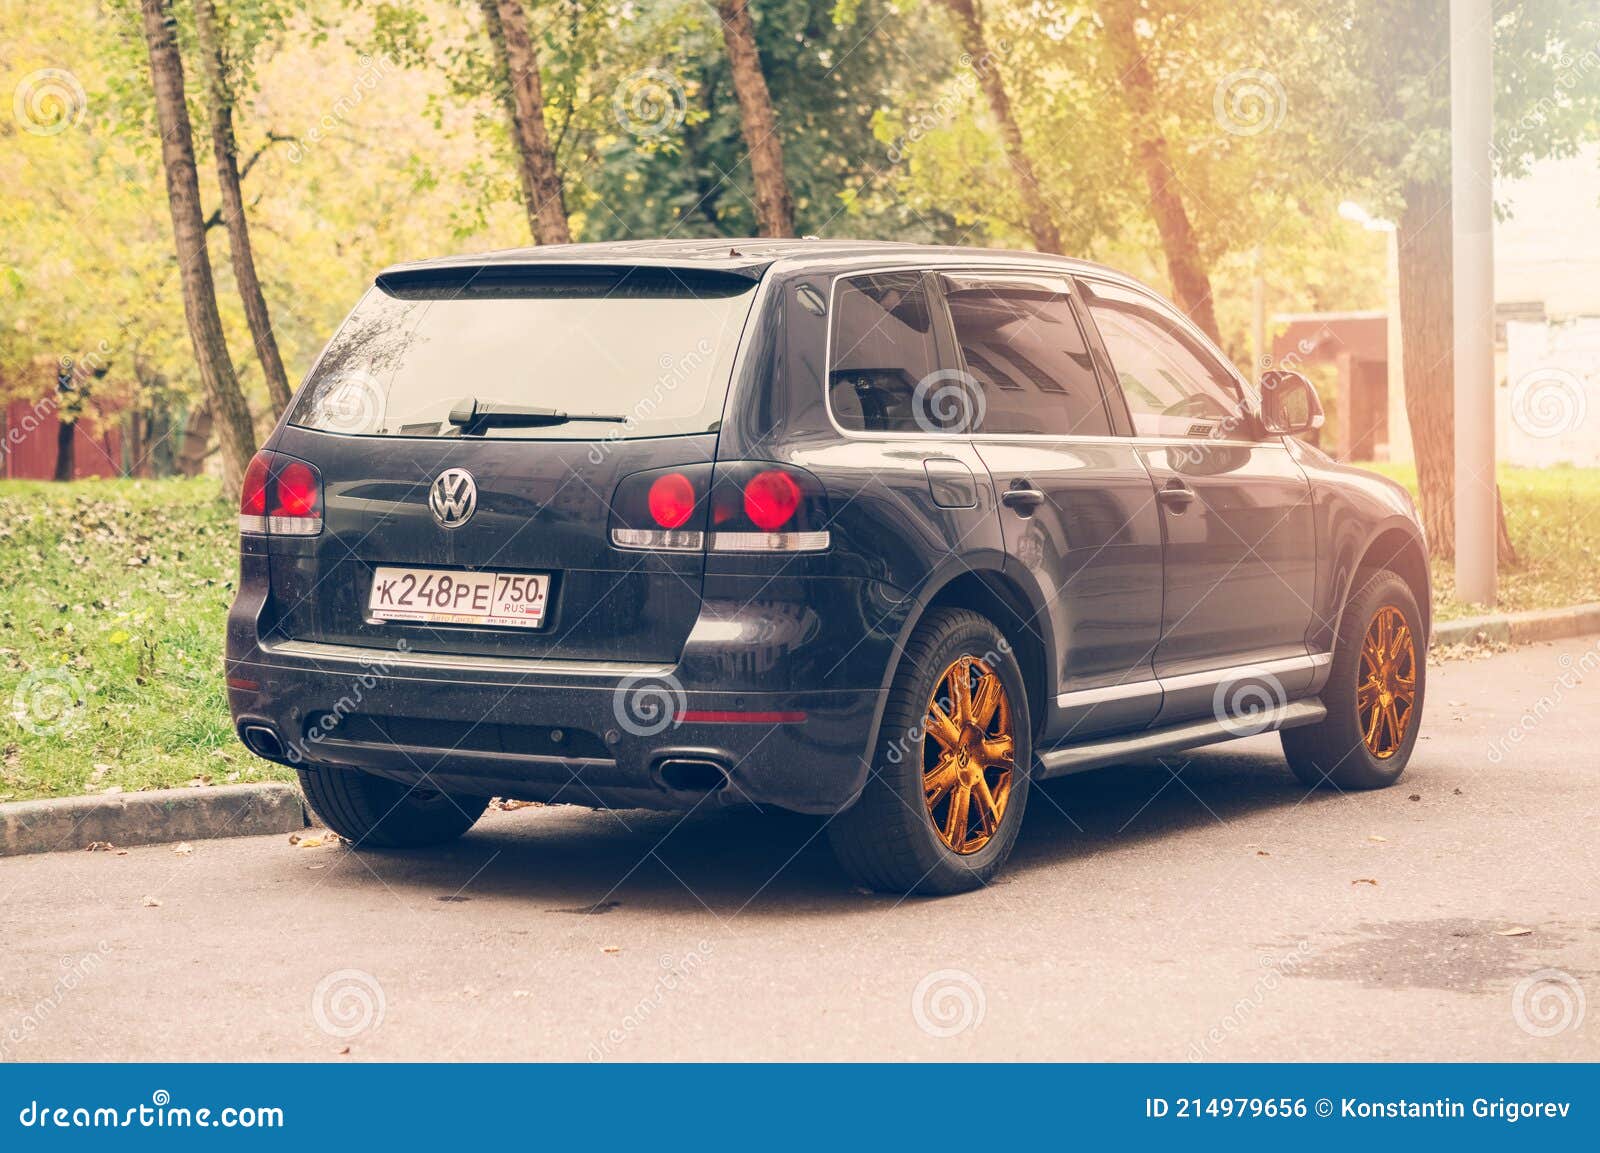 VW Touareg 7L in Stunning Dark Blue Body Color with Golden Wheels